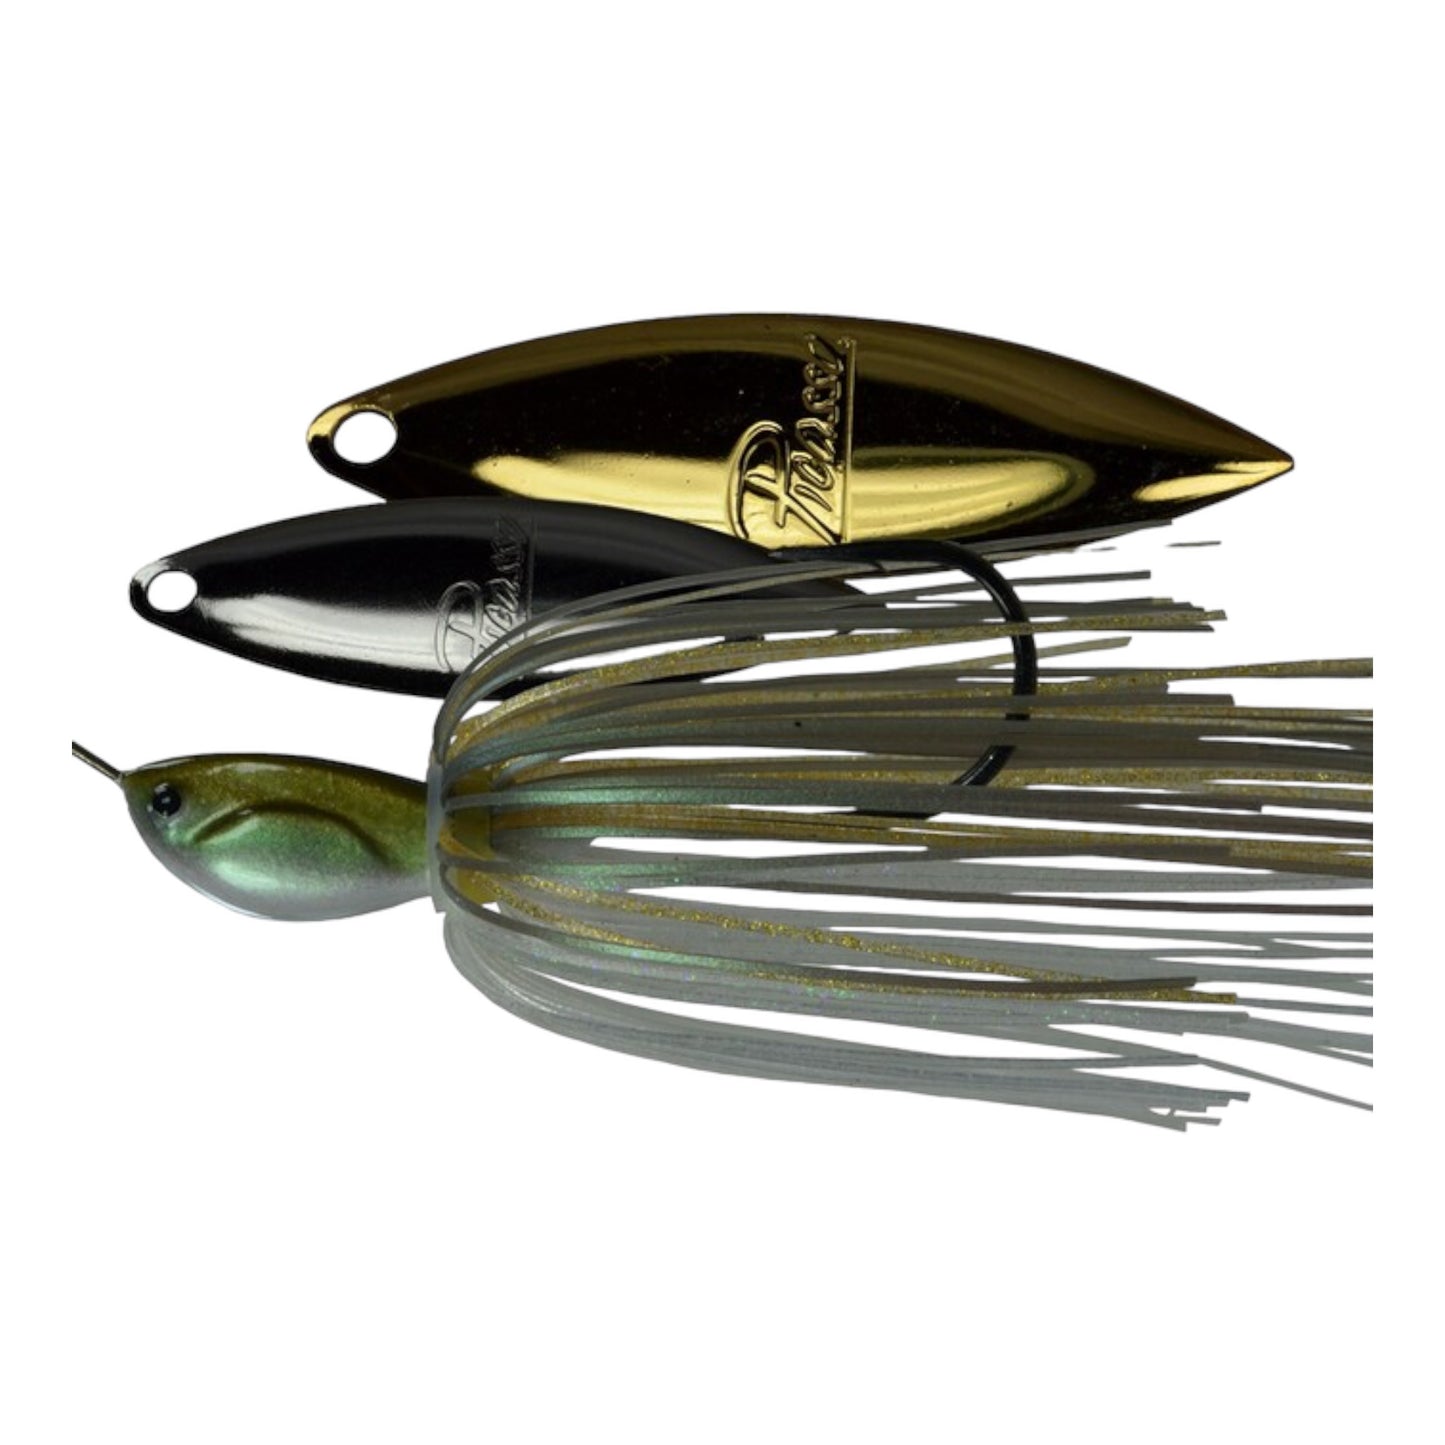 Picasso Lures Invizwire Super Strong DBL Willow Spinnerbait